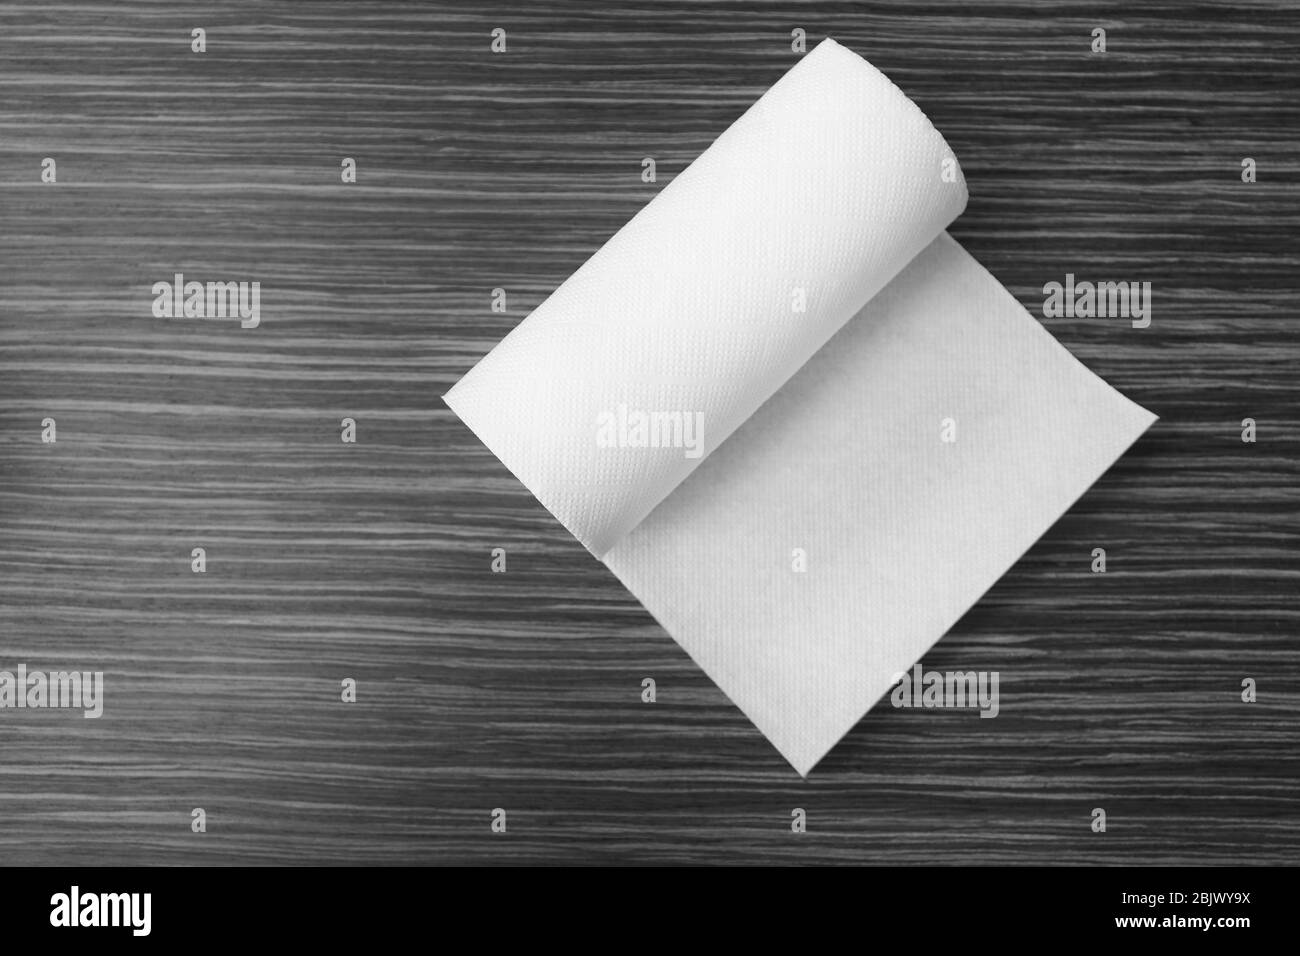 Roll of paper towels on table, top view Stock Photo